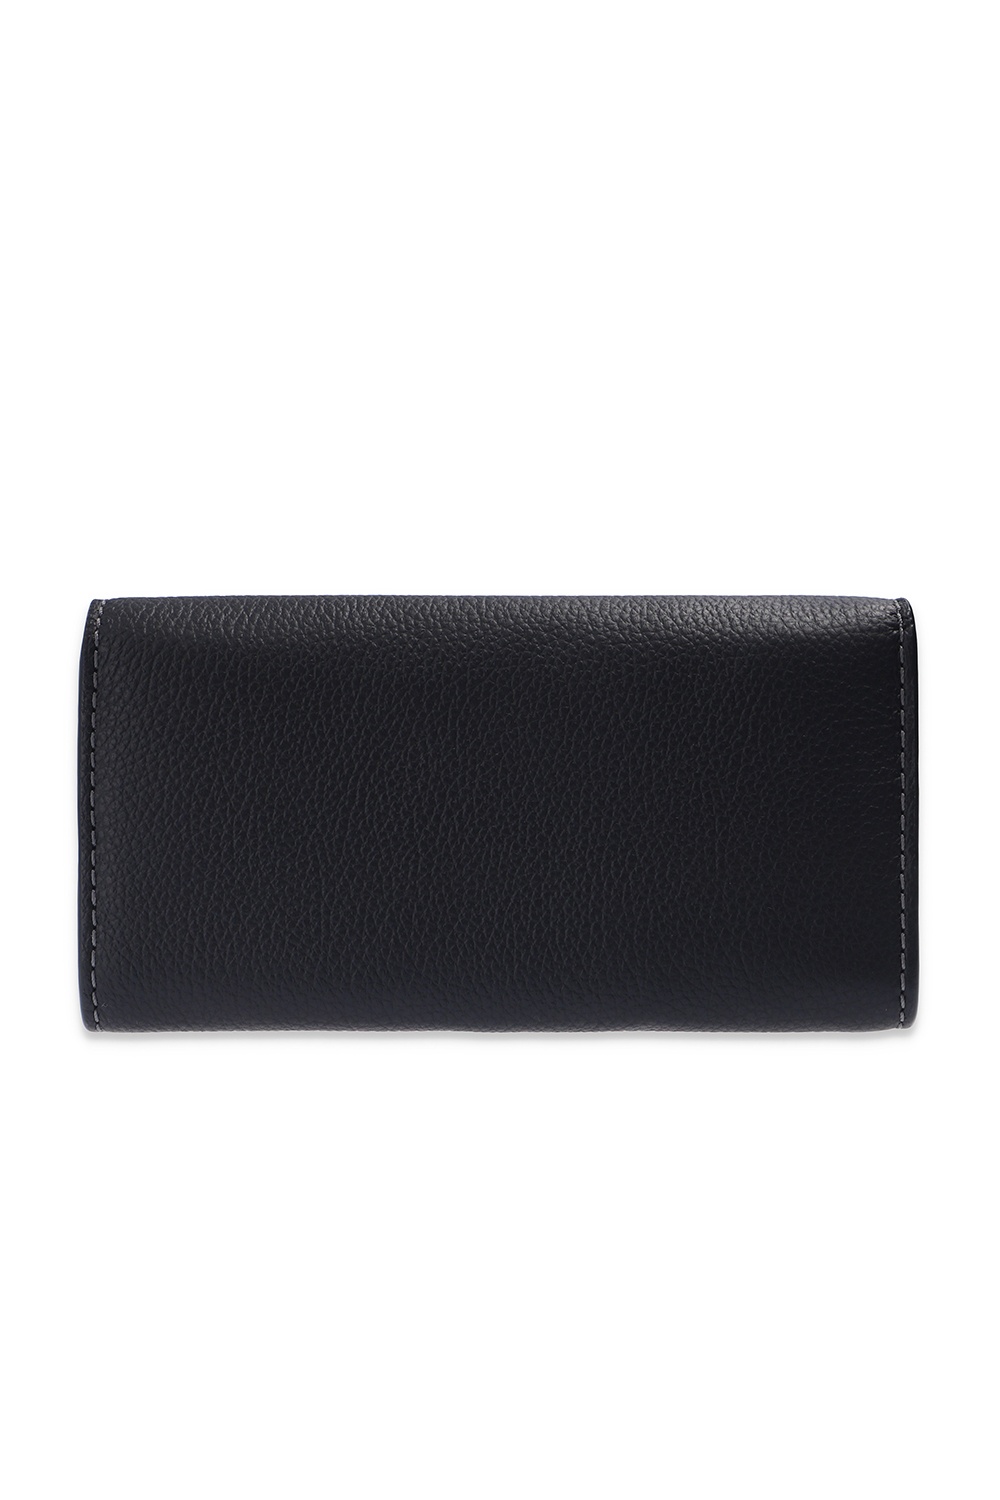 Chloé Leather wallet